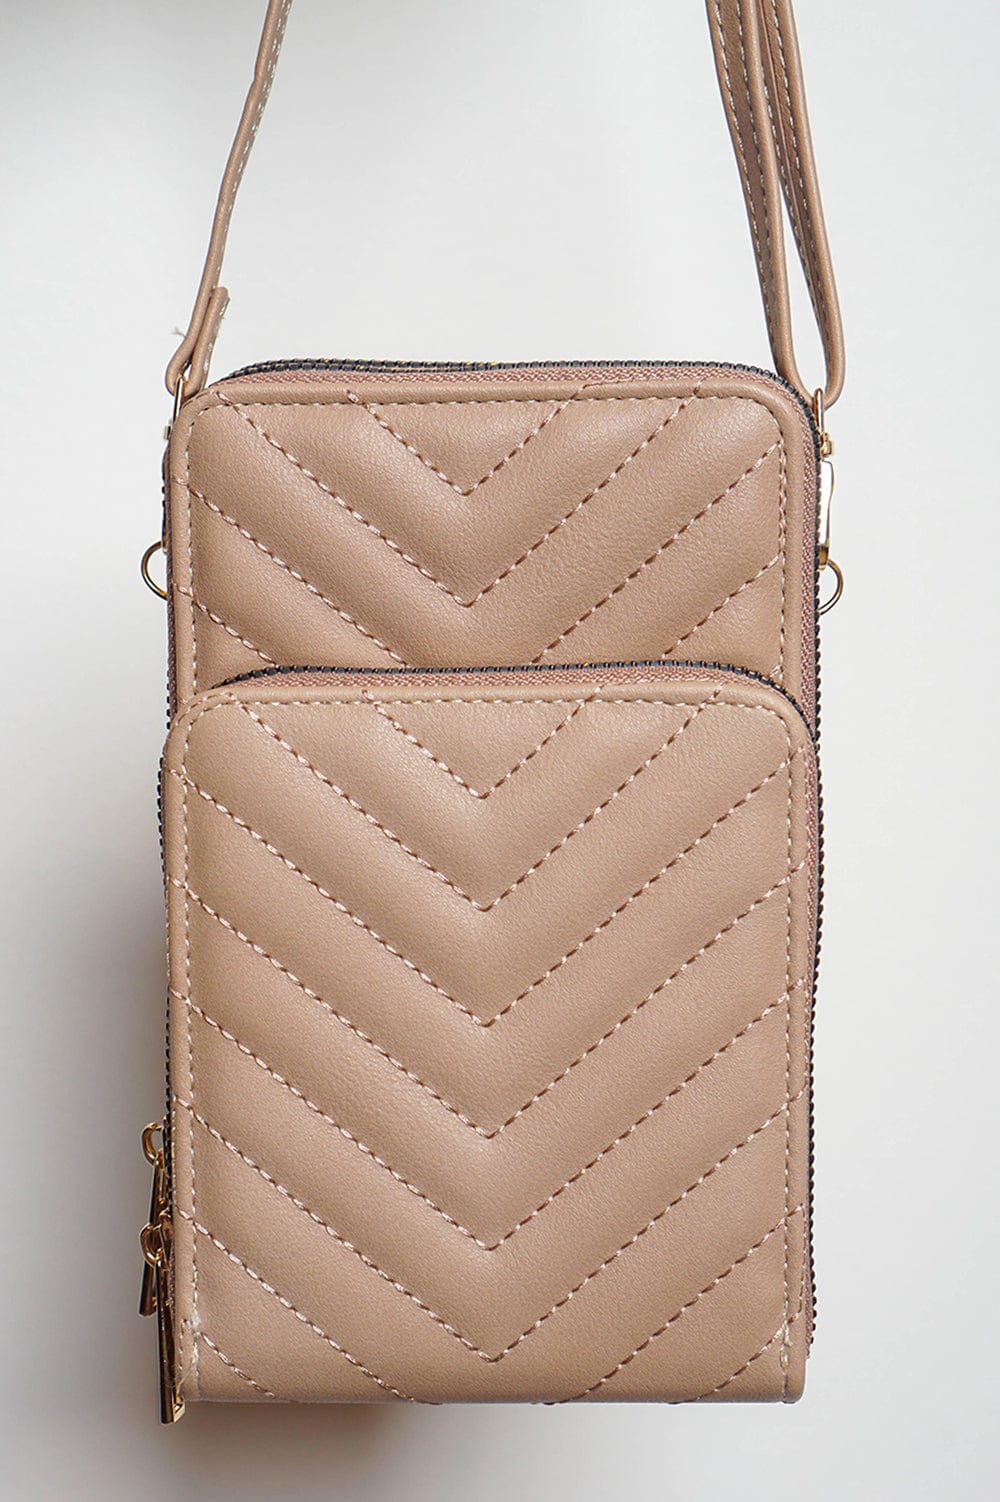 Chloe “C” Clutch With Chain- Delicate Pink